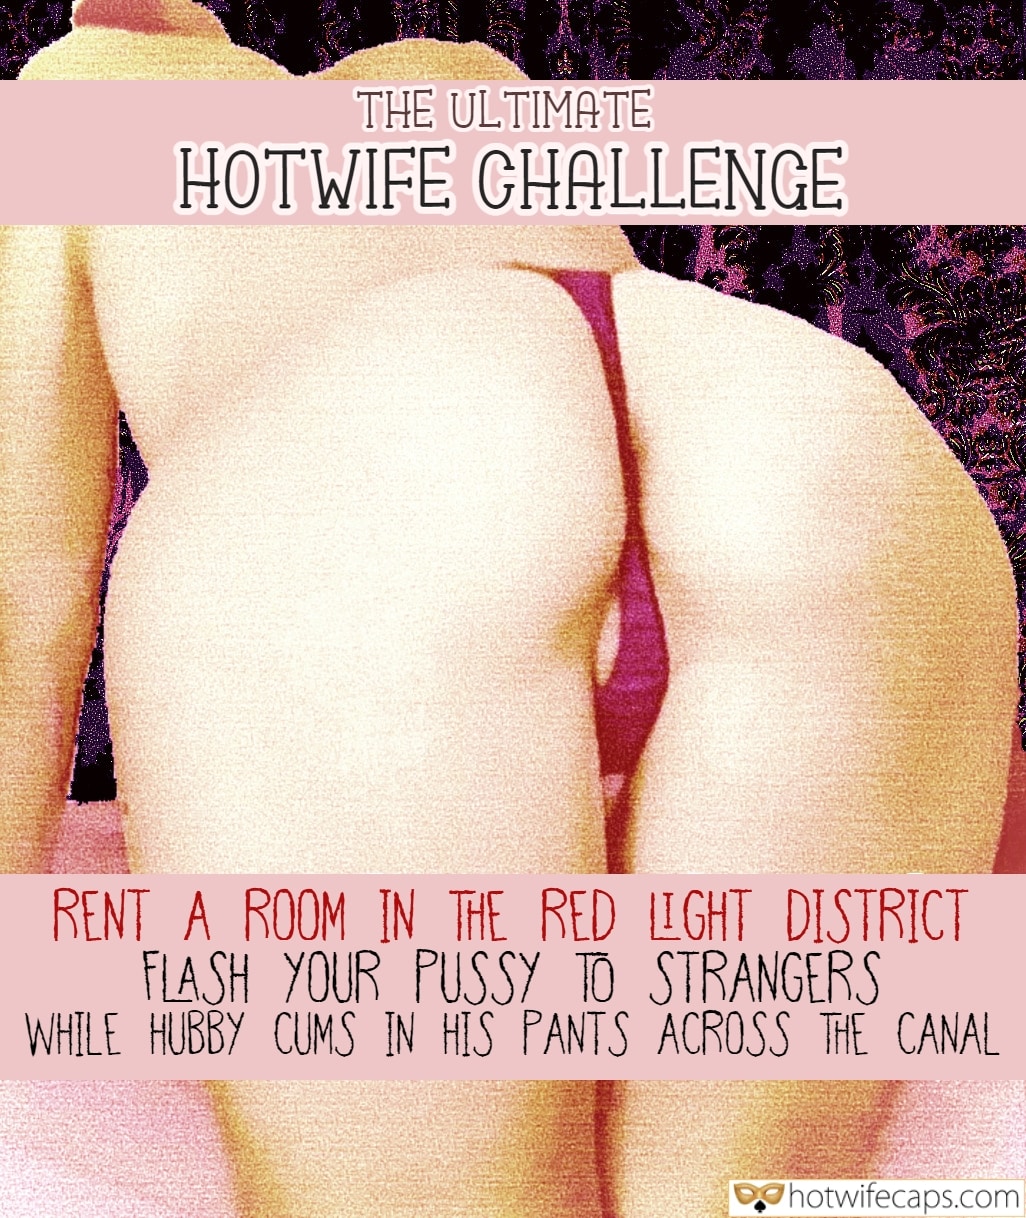 Wife Sharing Vacation Public Flashing Cuckold Stories Challenges and Rules hotwife caption: THE ULTIMATE HOTWIFE CHALLENGE RENT A ROOM IN THE RED LIGHT DISTRICT FLASH YOUR PUSSY TO STRANGERS WHILE HUBBY CUMS IN HIS PANTS ACROSS THE CANAL.. Big Ass Bent Over in Red Thong